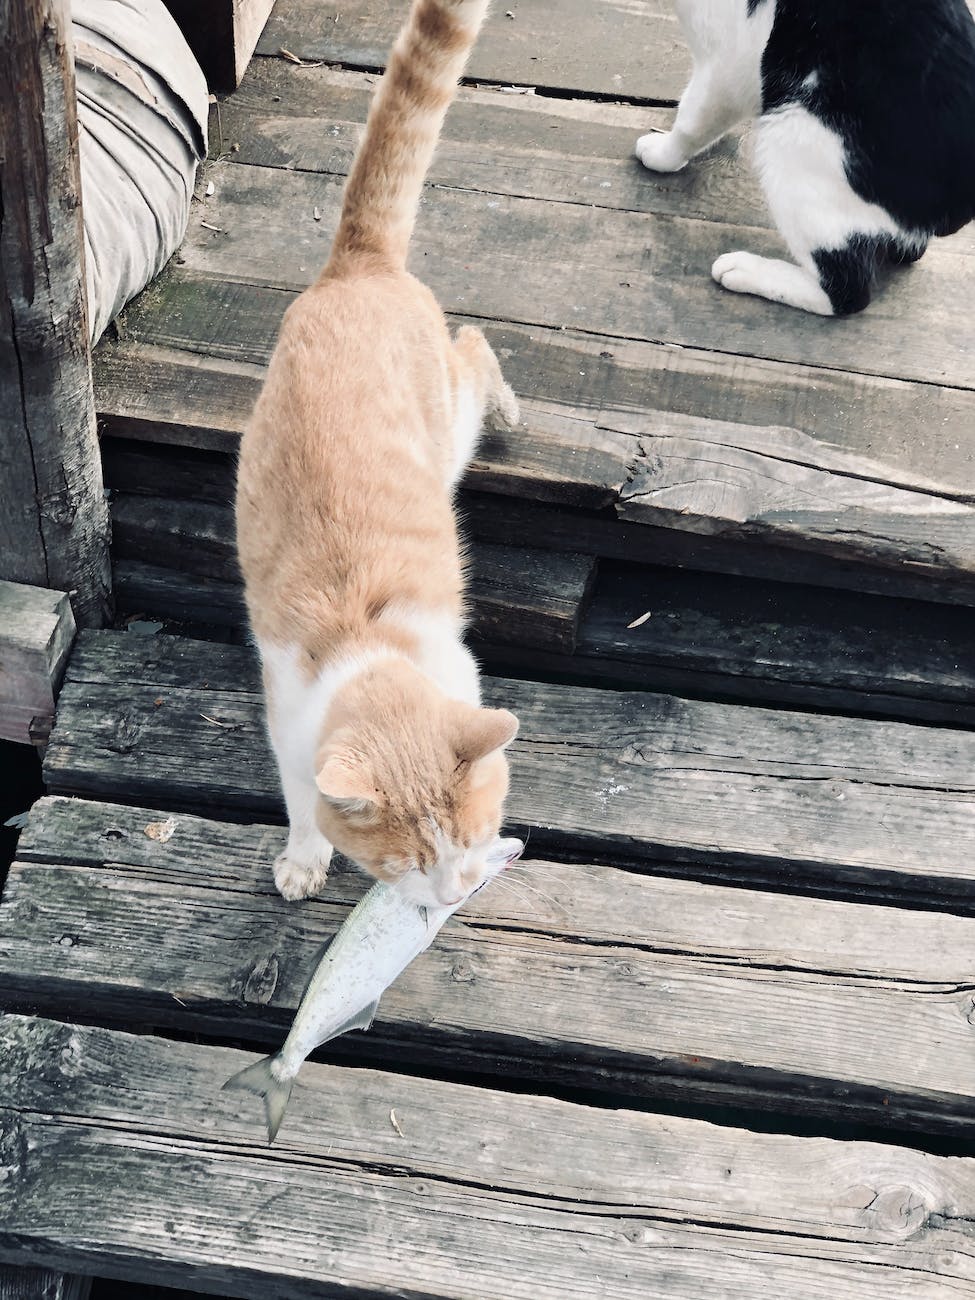 a cat eating fish on the wooden surface